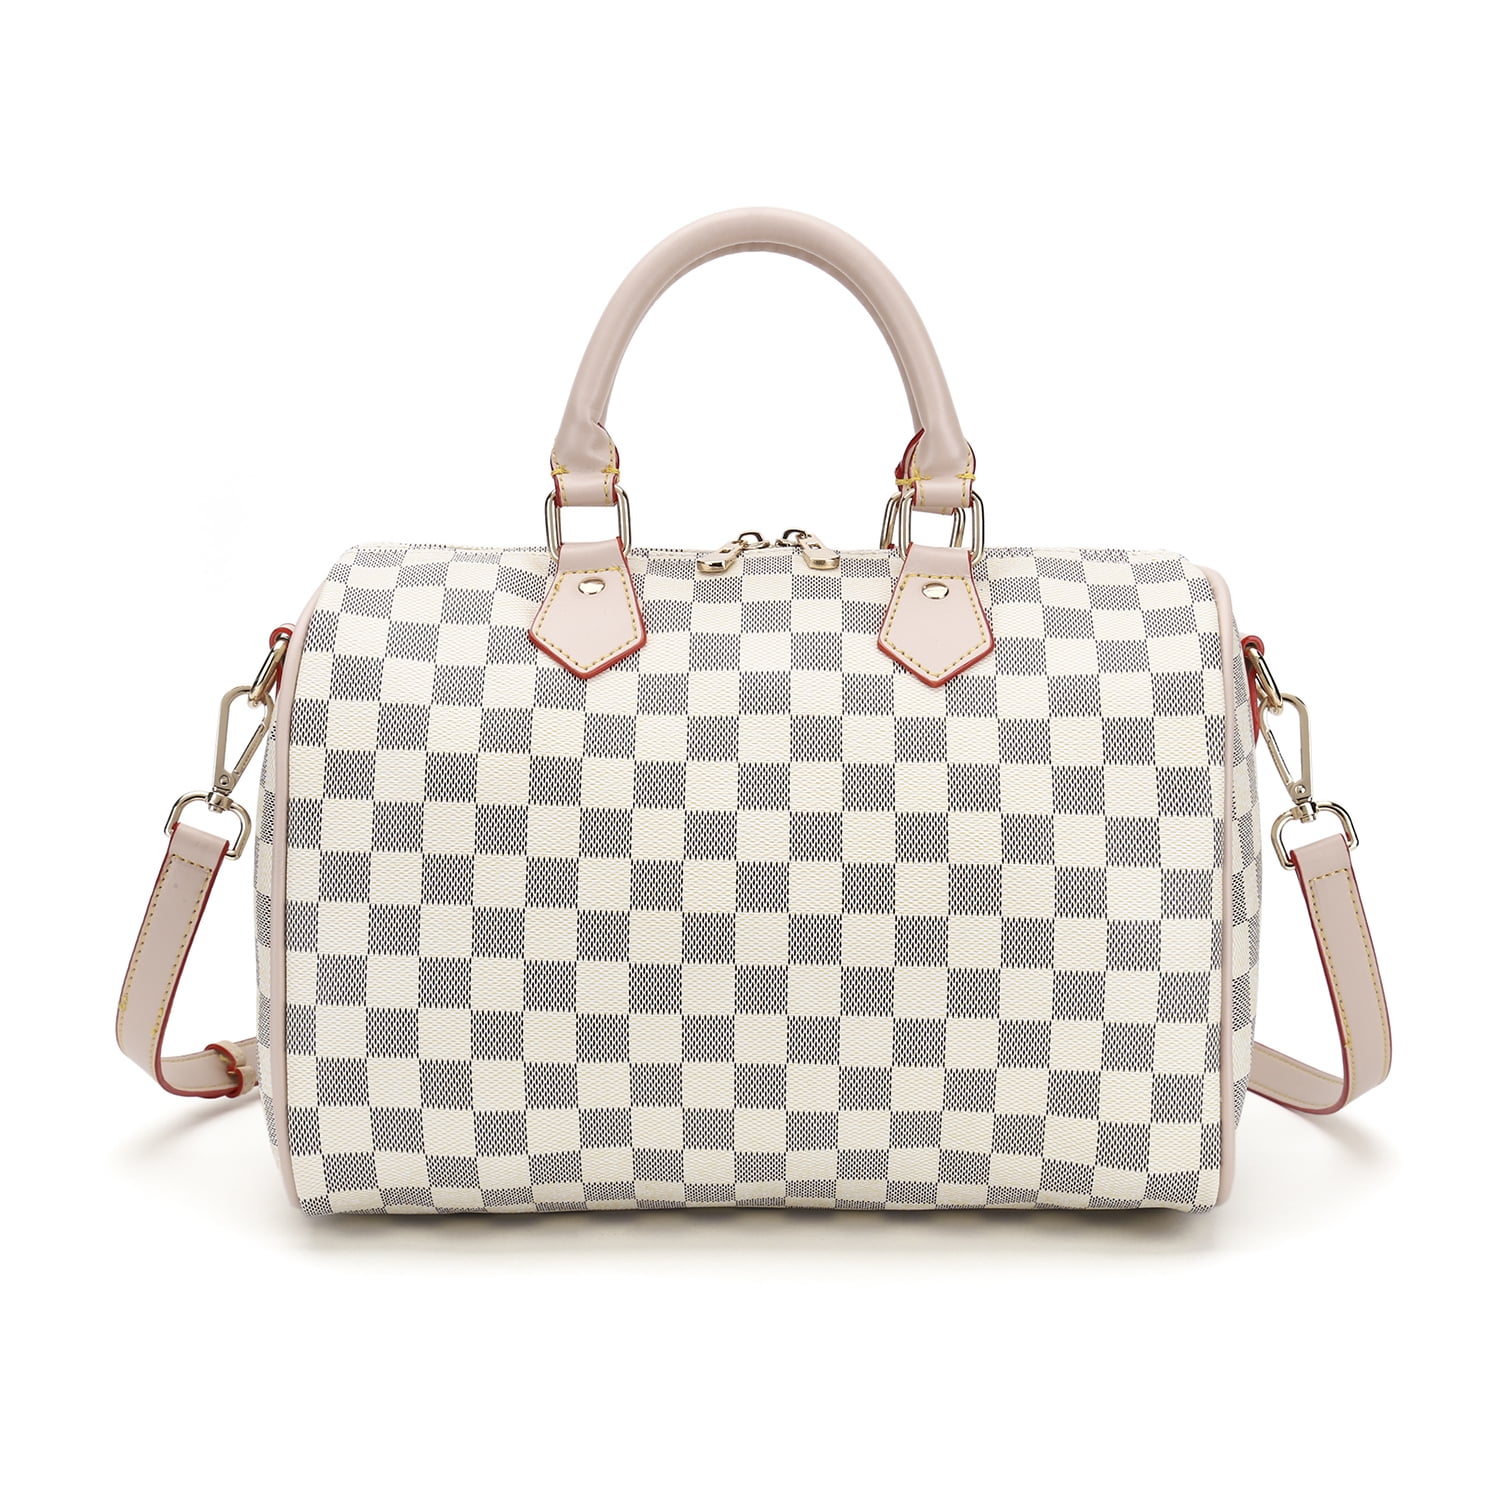 RICHPORTS Checkered Women PU Leather Tote Bag Tassels Leather Shoulder Handbags Fashion Ladies ...